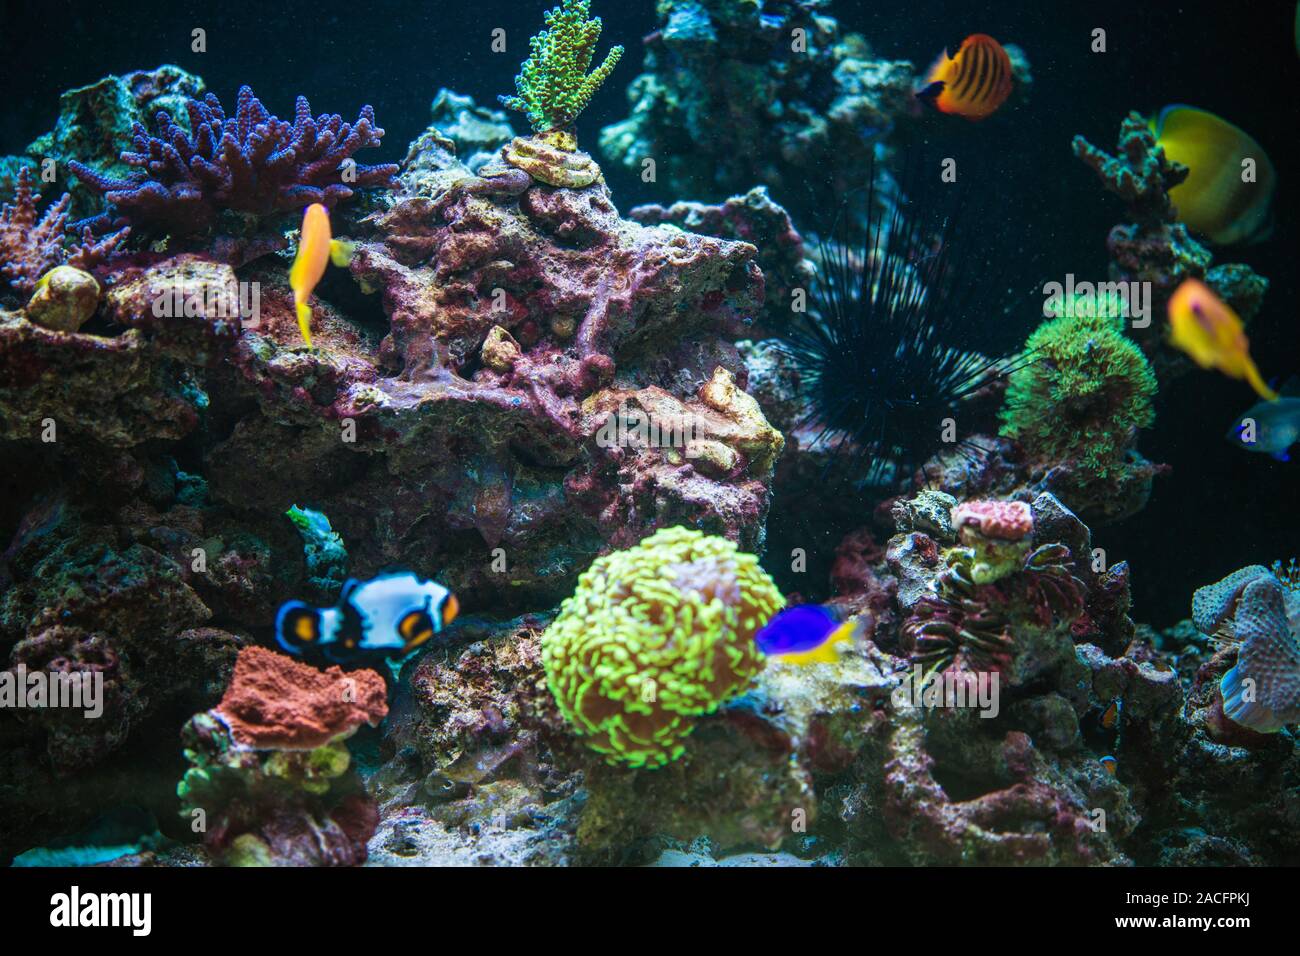 Marine Aquarium Reef and Tropical Fishes. Marine Plants and Animals in a Contained Environment. Stock Photo